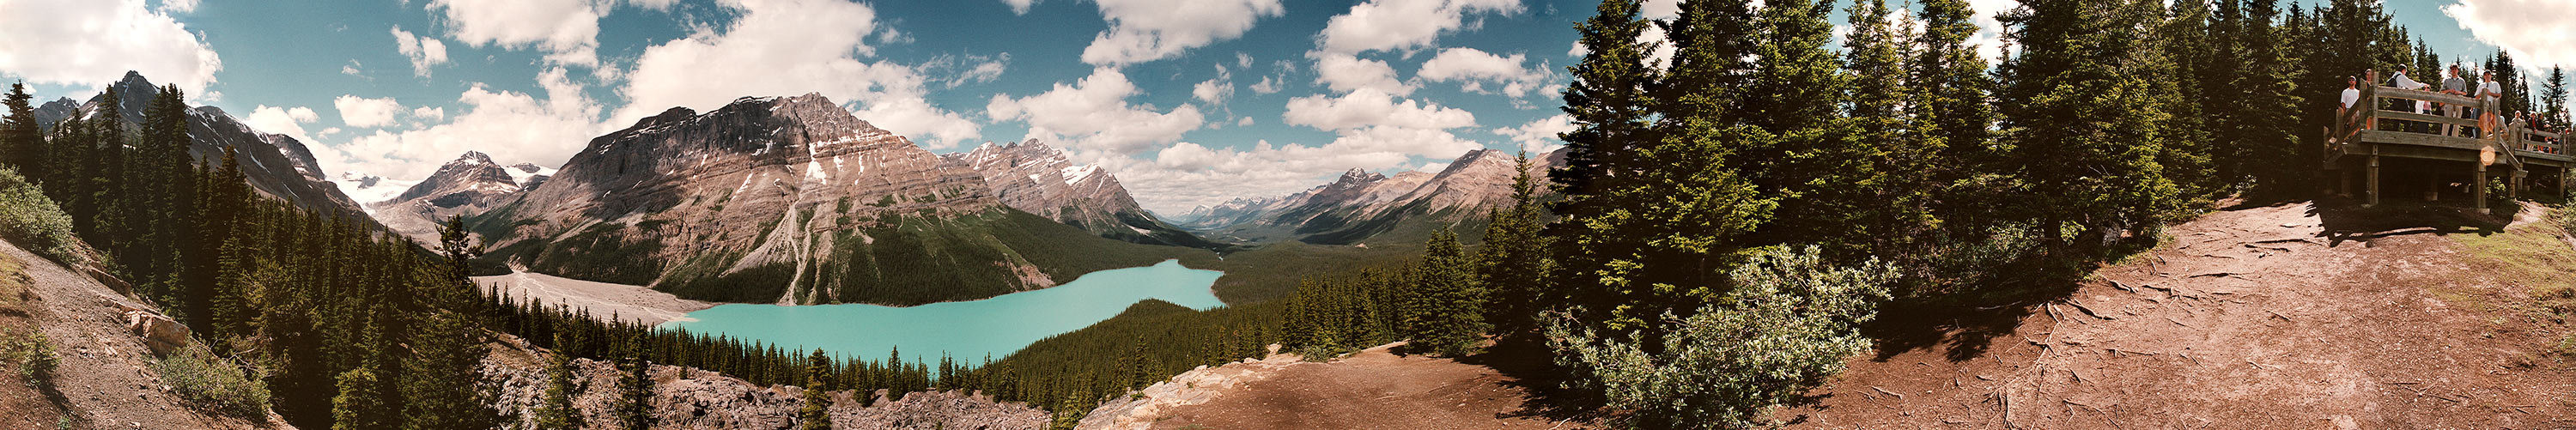 This 360 panorama is from Peyto Lake, Canada